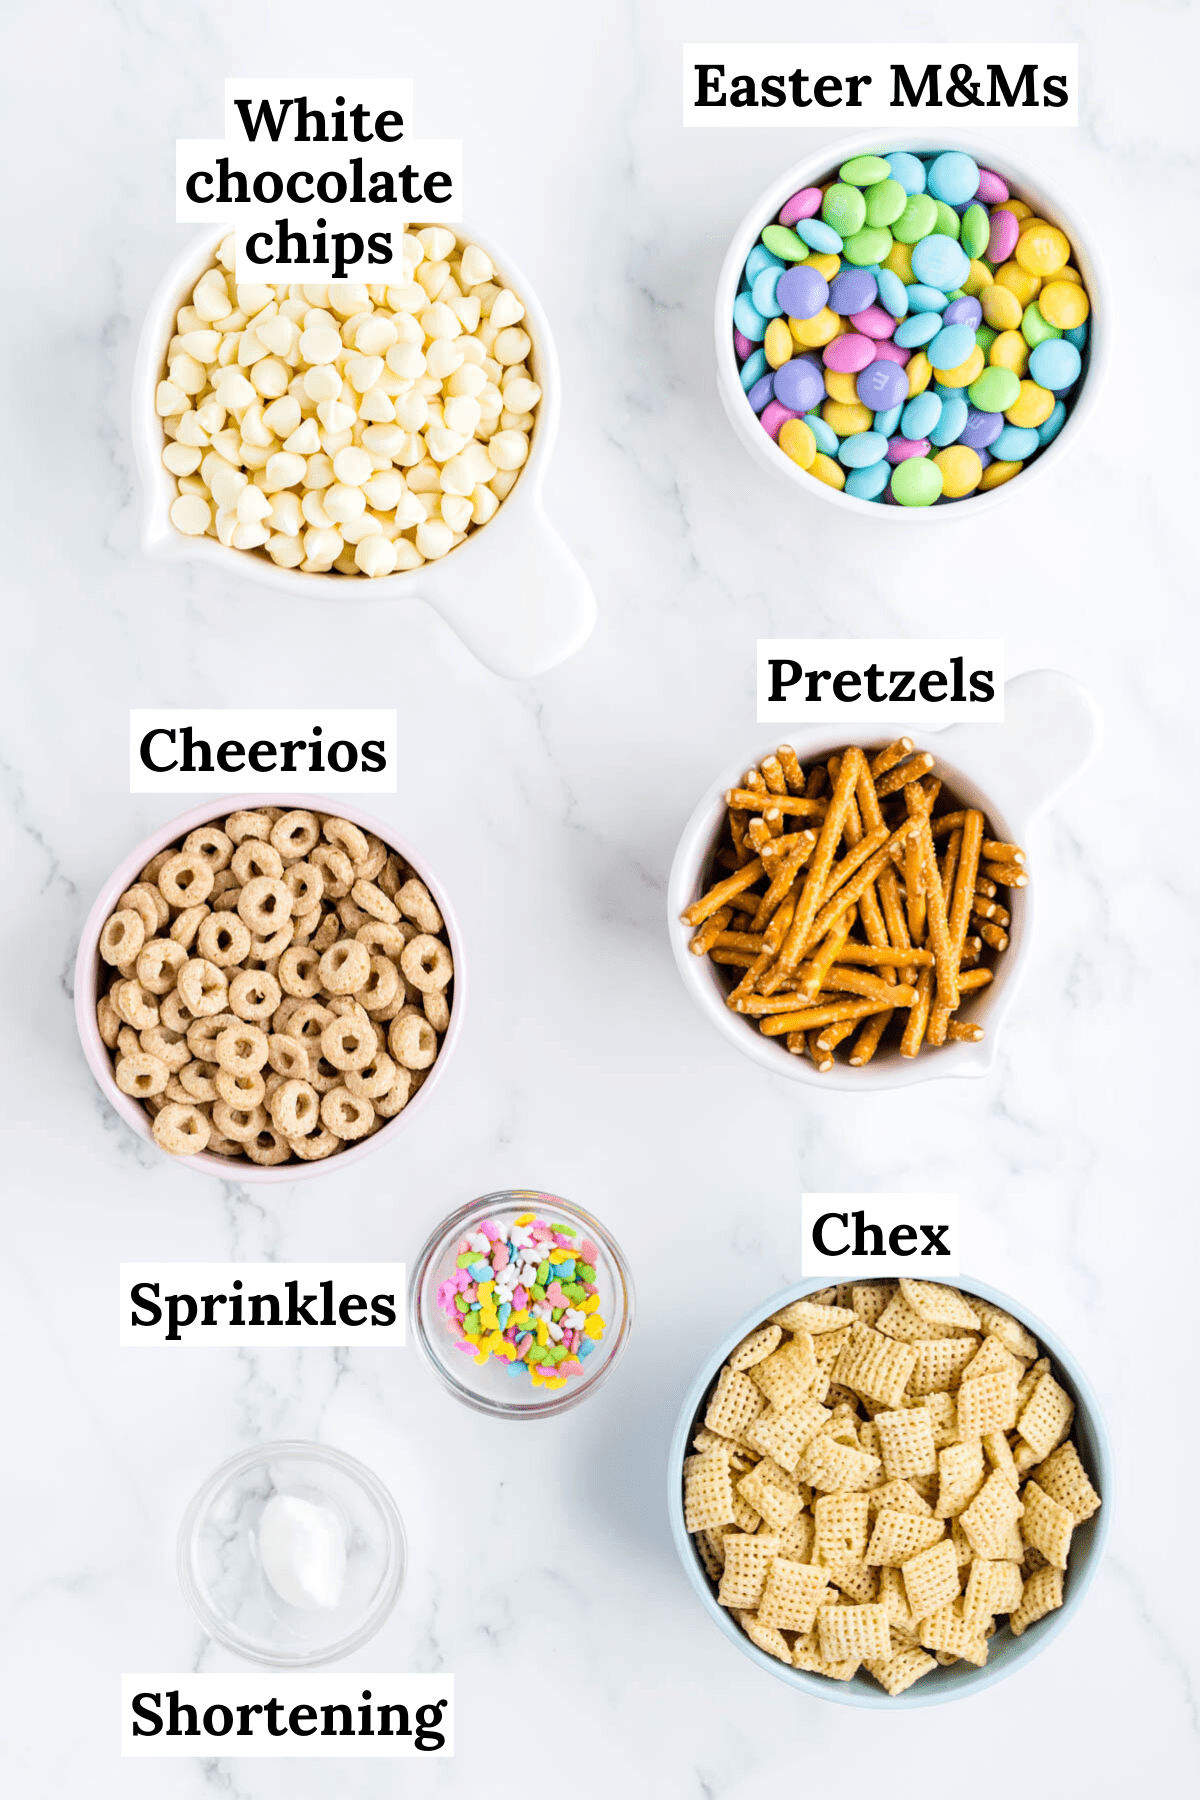 ingredients for bunny bait including rice chex cereal, honey nut cheerios, pretzel sticks, easter M&Ms, white chocolate chips, vegetable shortening, and easter sprinkles